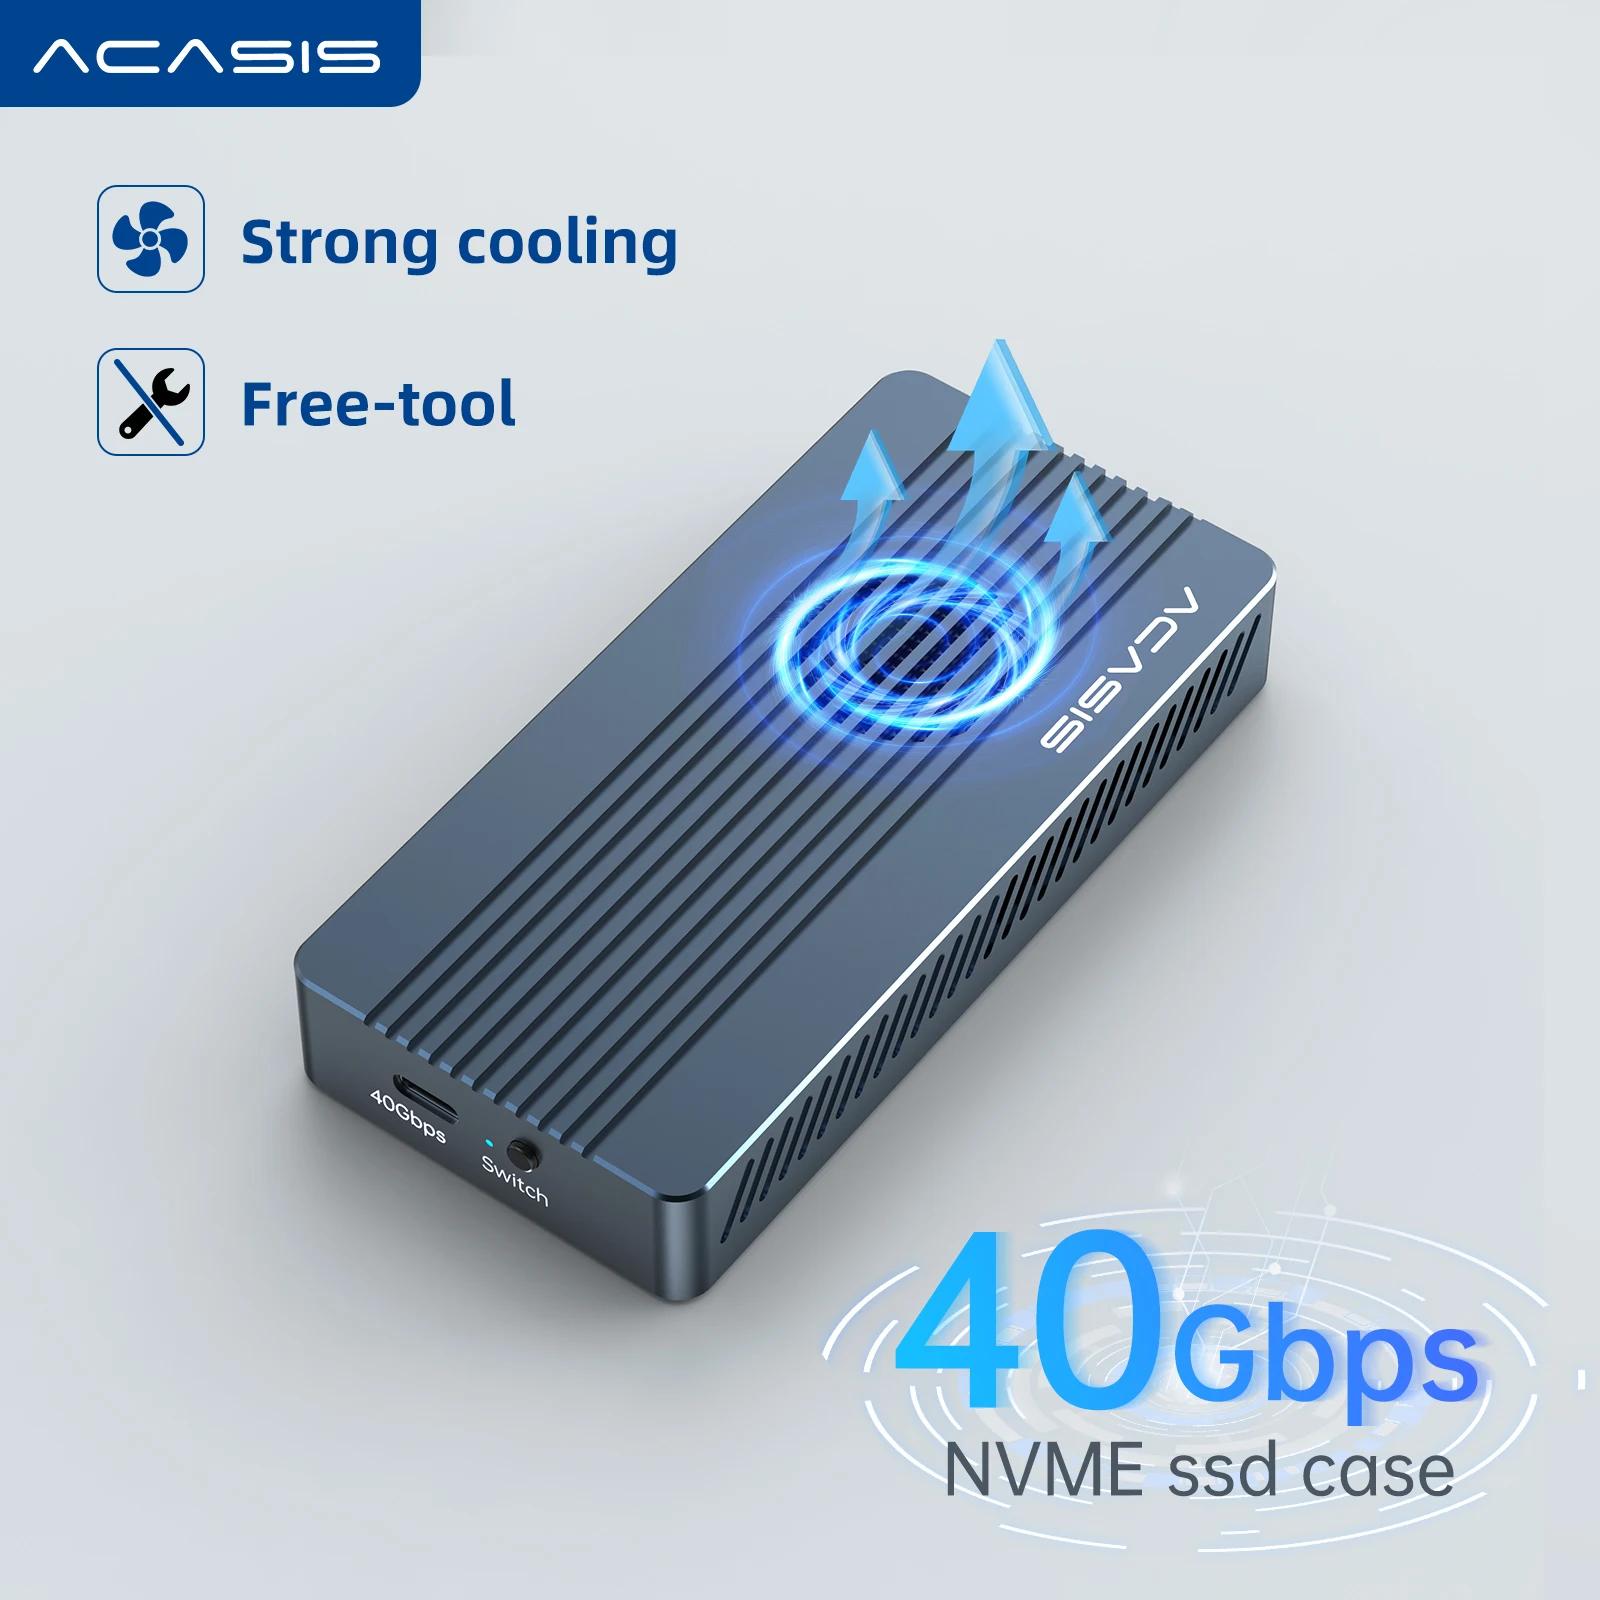 Acasis USB 4.0 NVME M2 SSD ̽, Ʈ ̽ ȣȯ, ġ ̽ , ƺ ο SSD, 40Gbps